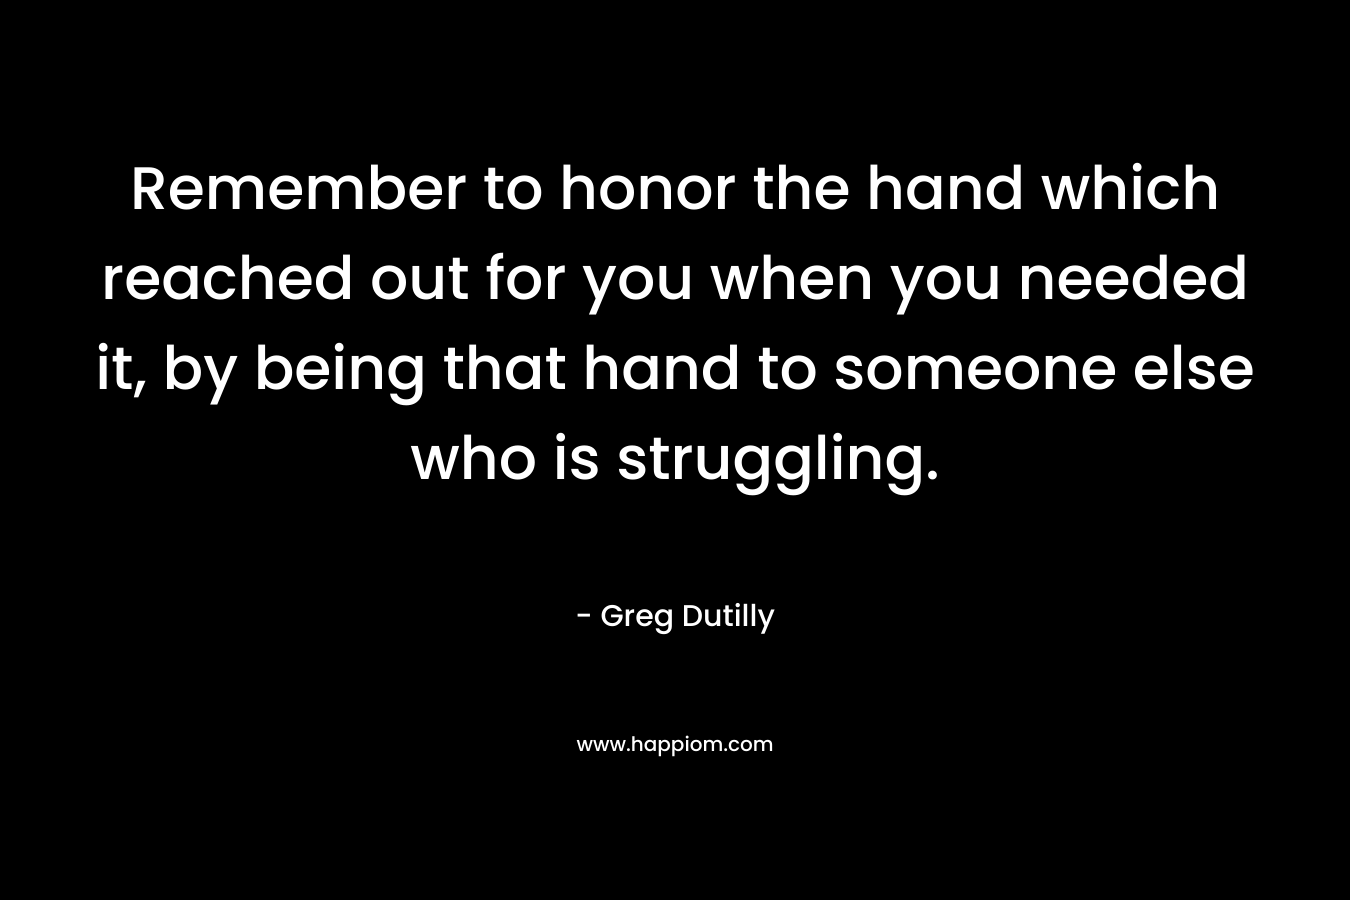 Remember to honor the hand which reached out for you when you needed it, by being that hand to someone else who is struggling.